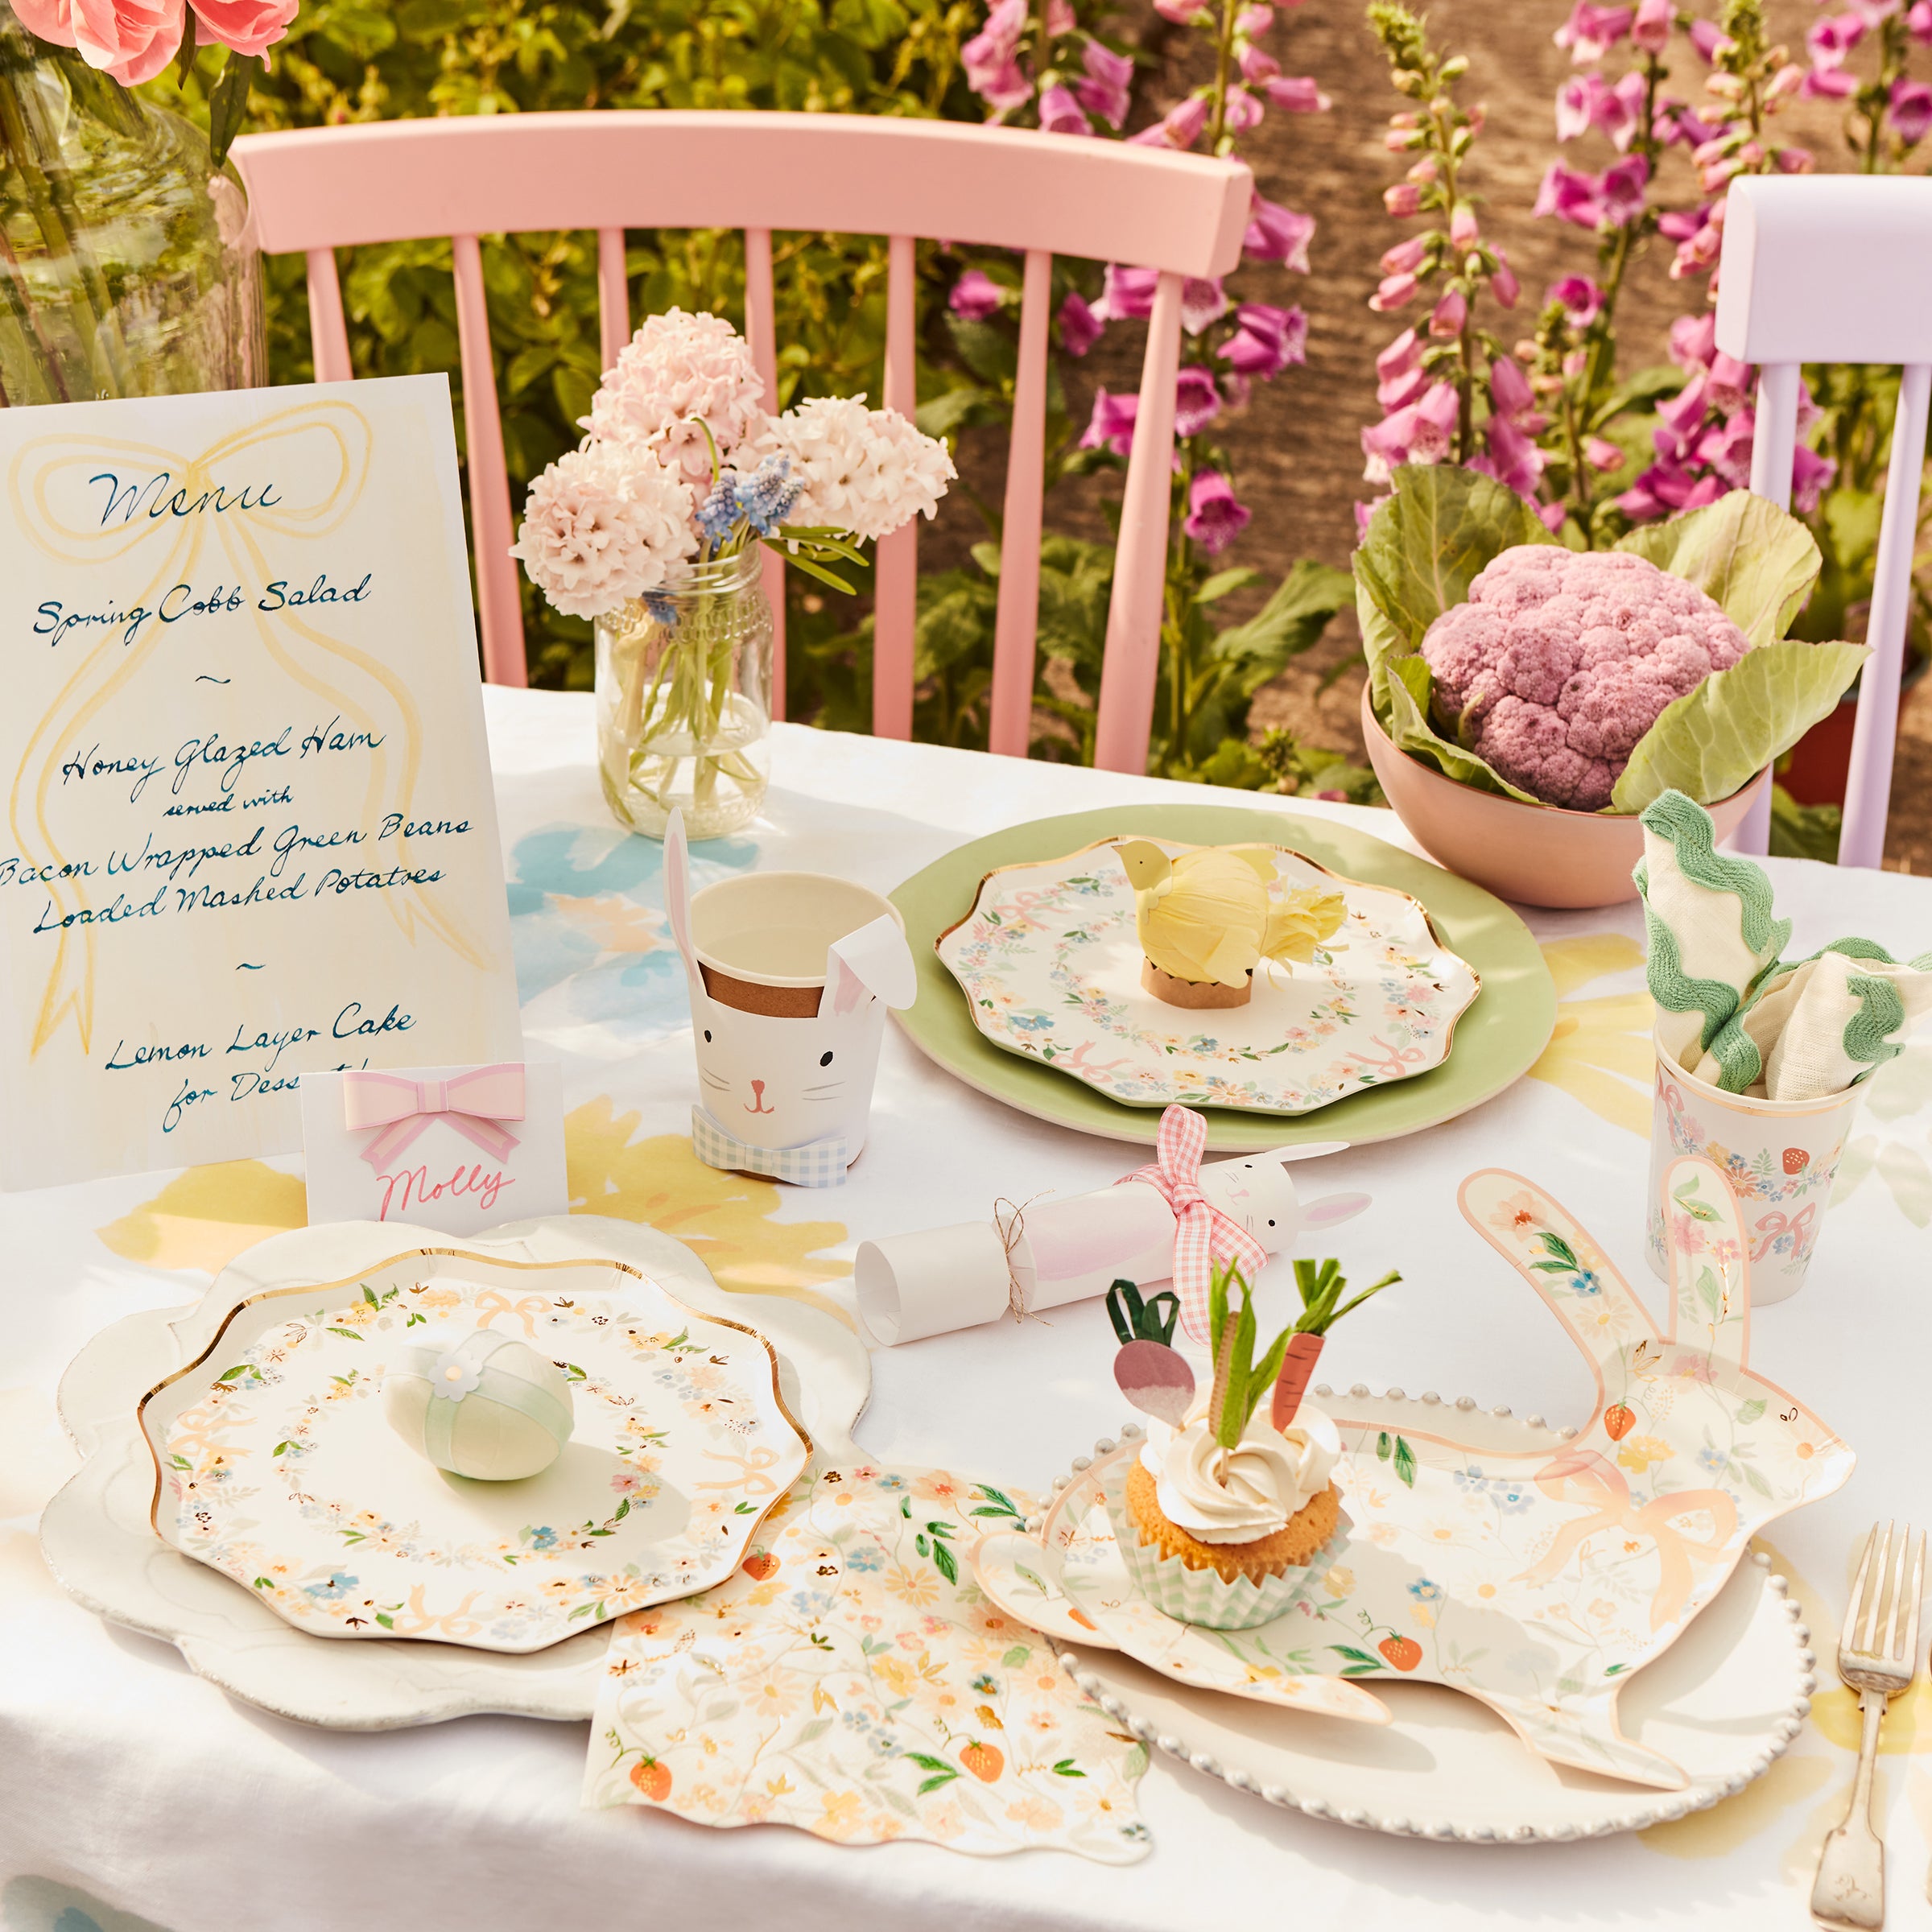 Our party napkins, with flowers and strawberries, and wavy borders look great for garden parties or picnics.